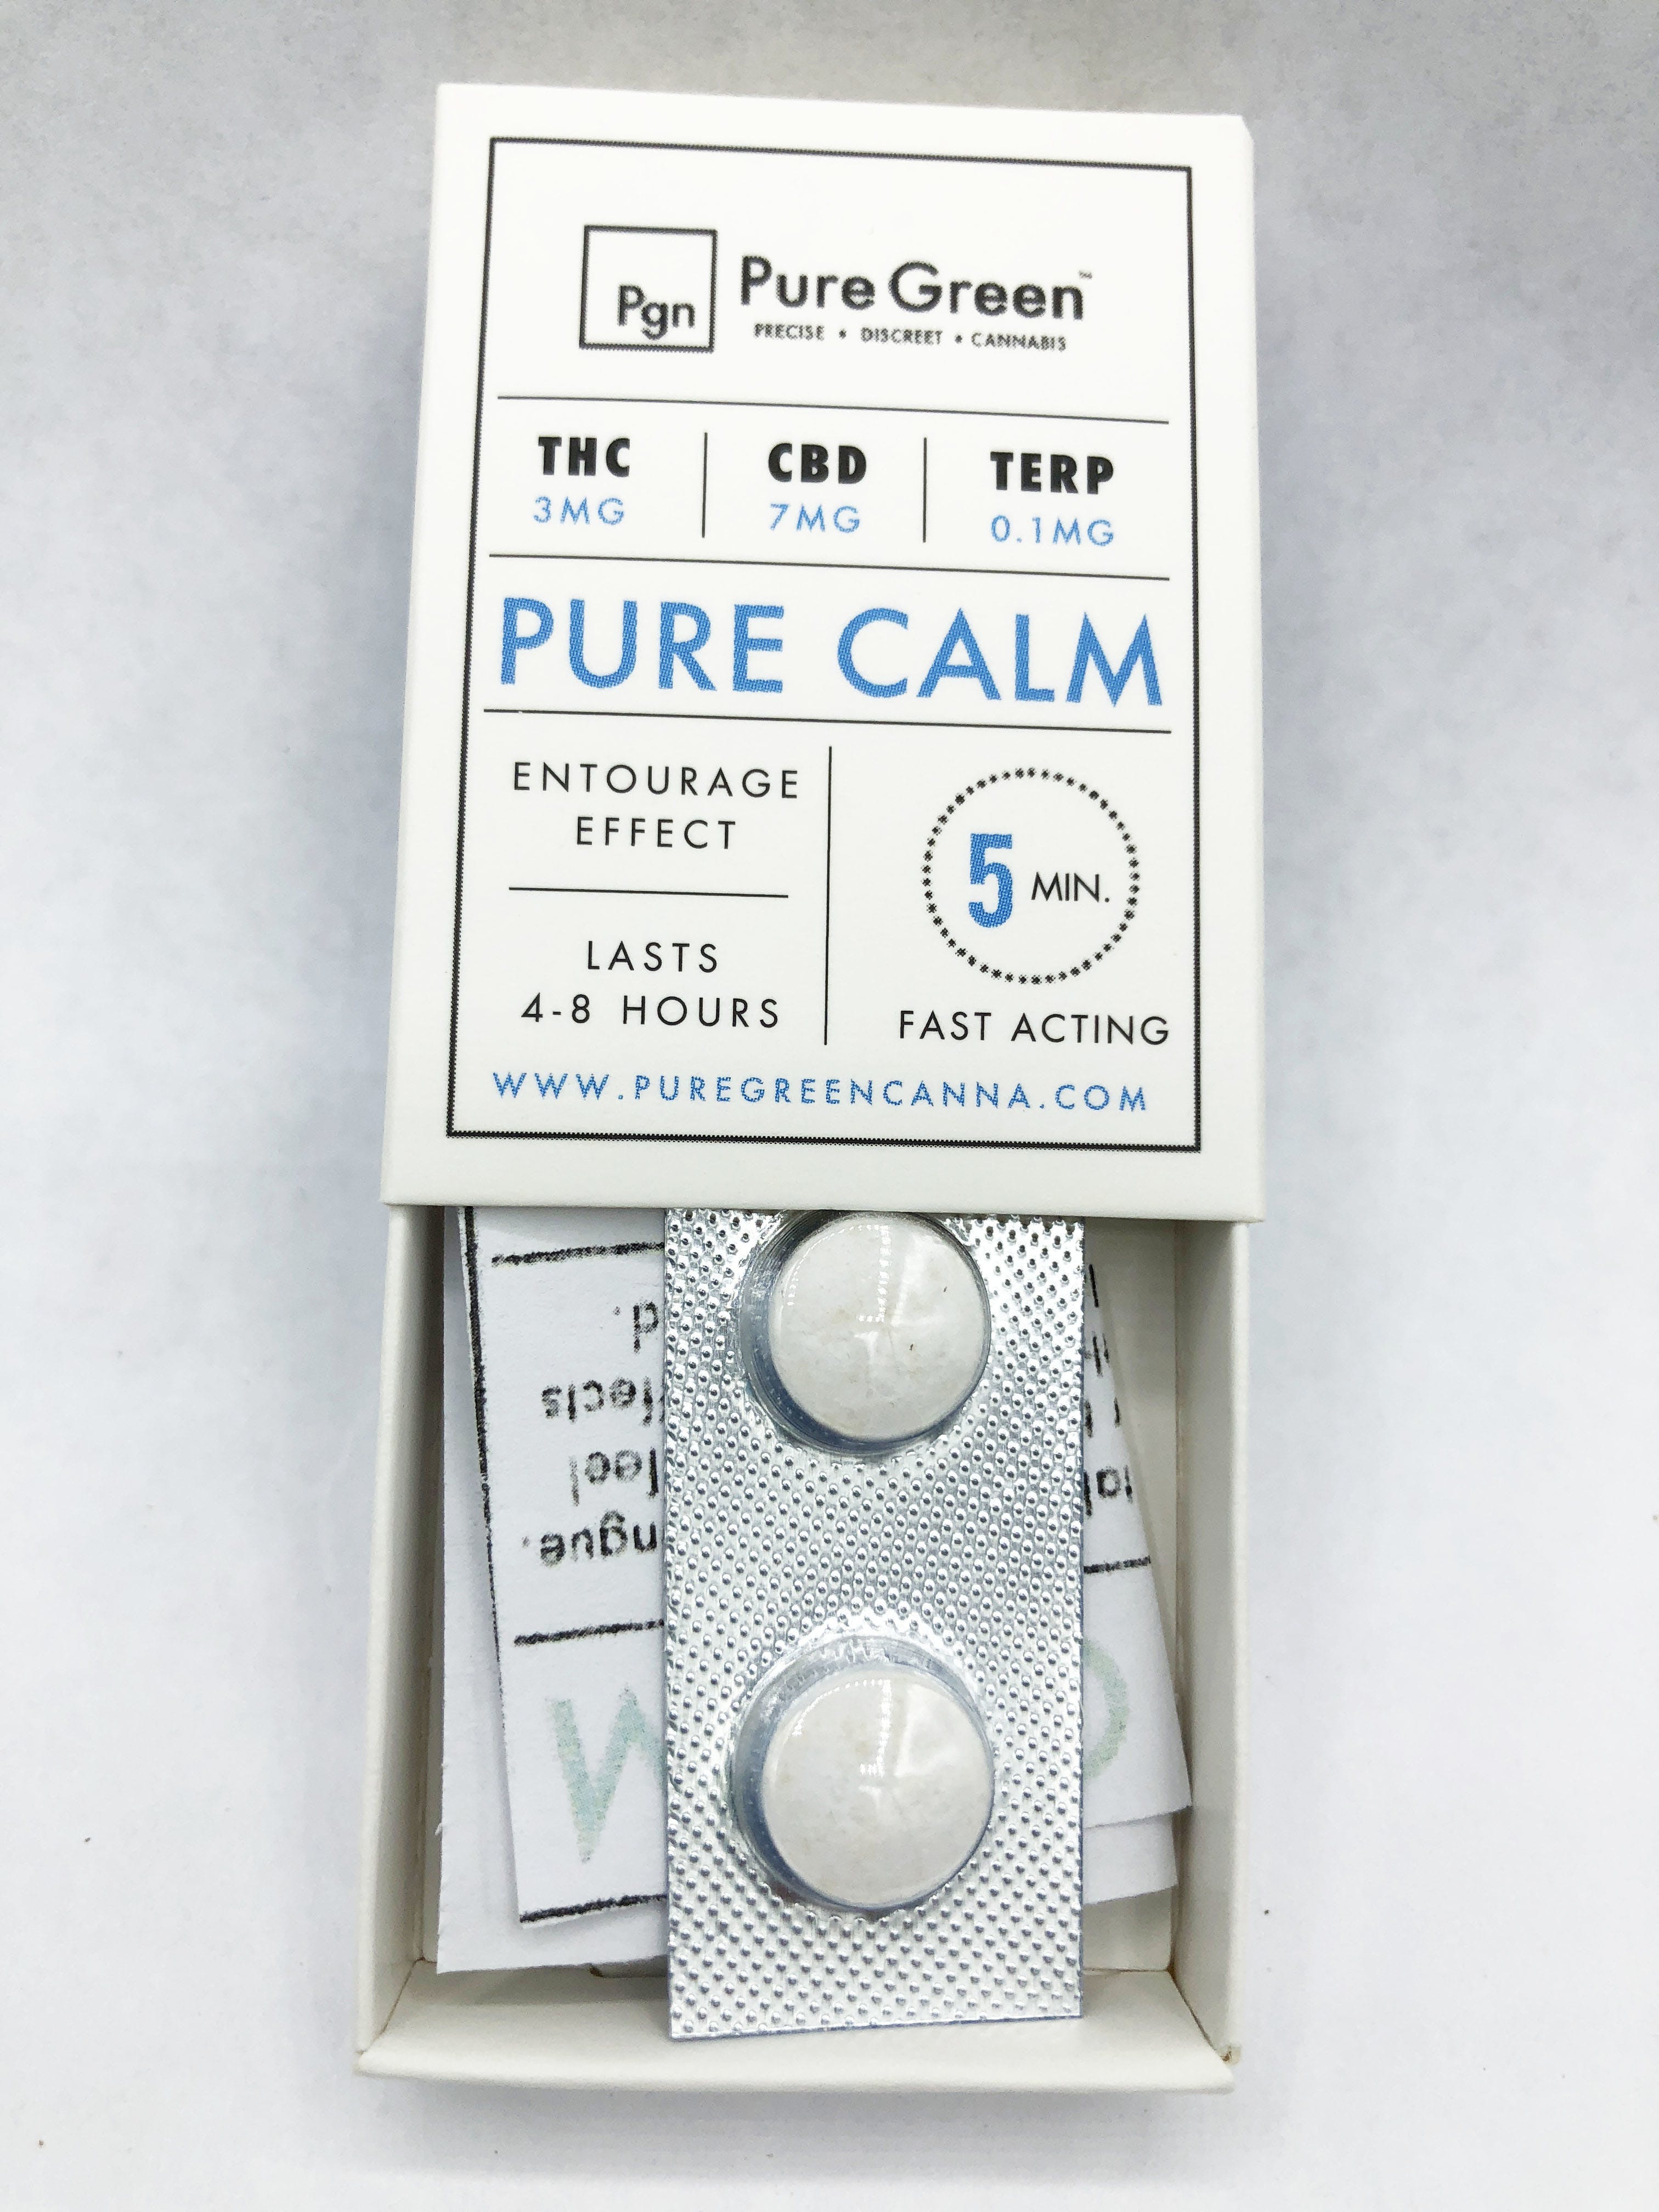 2 pk - Pure Calm - CBD/THC Tablets by Pure Green